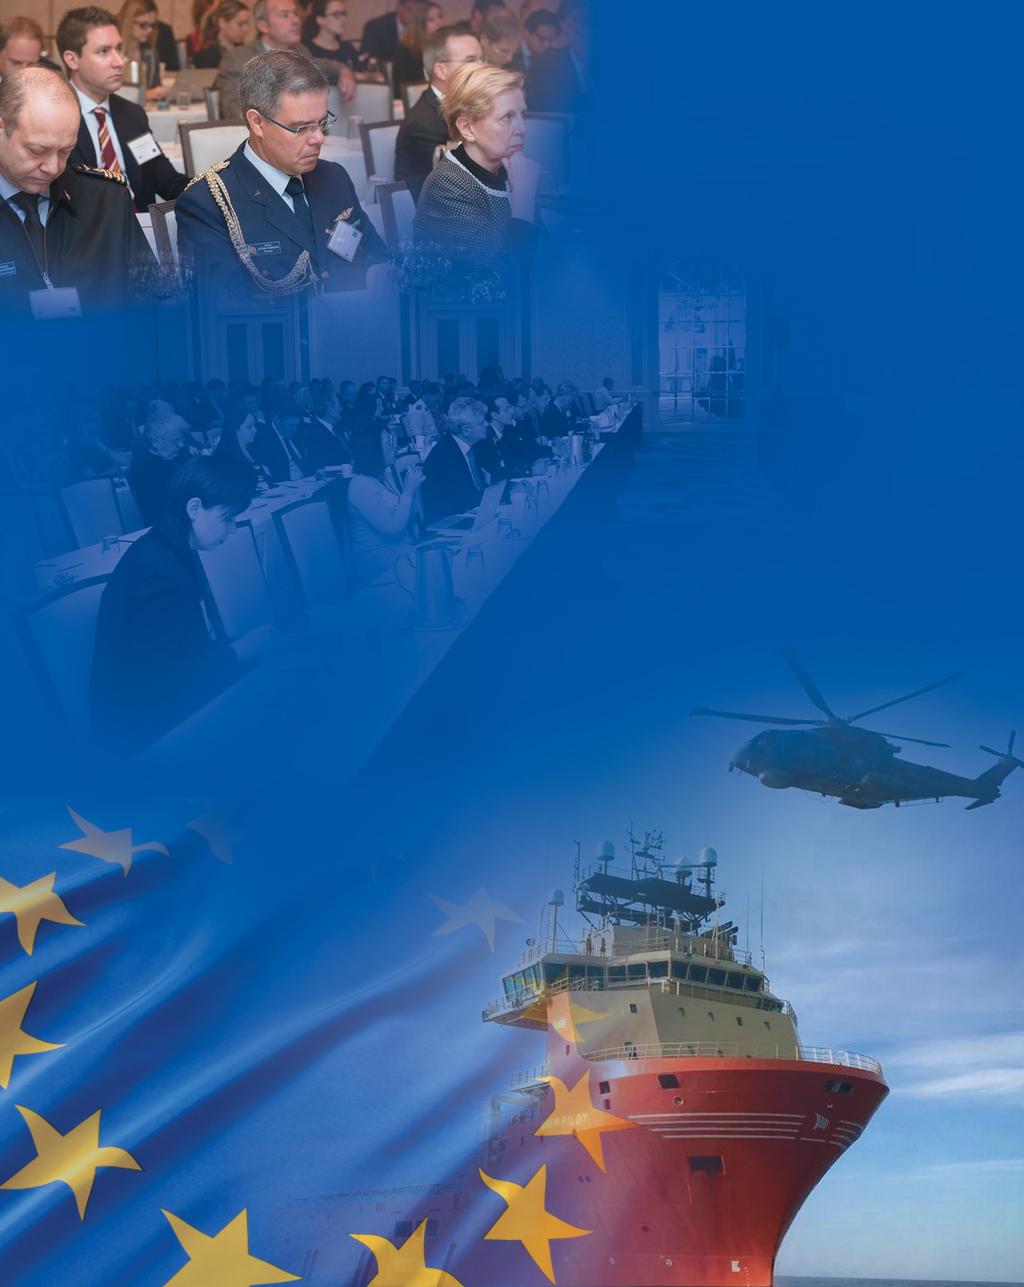 Since the EU s first Common Security and Defense Policy (CSDP) mission in Bosnia, launched in 2003, the United States and the EU have worked together on the ground and with other partners, especially